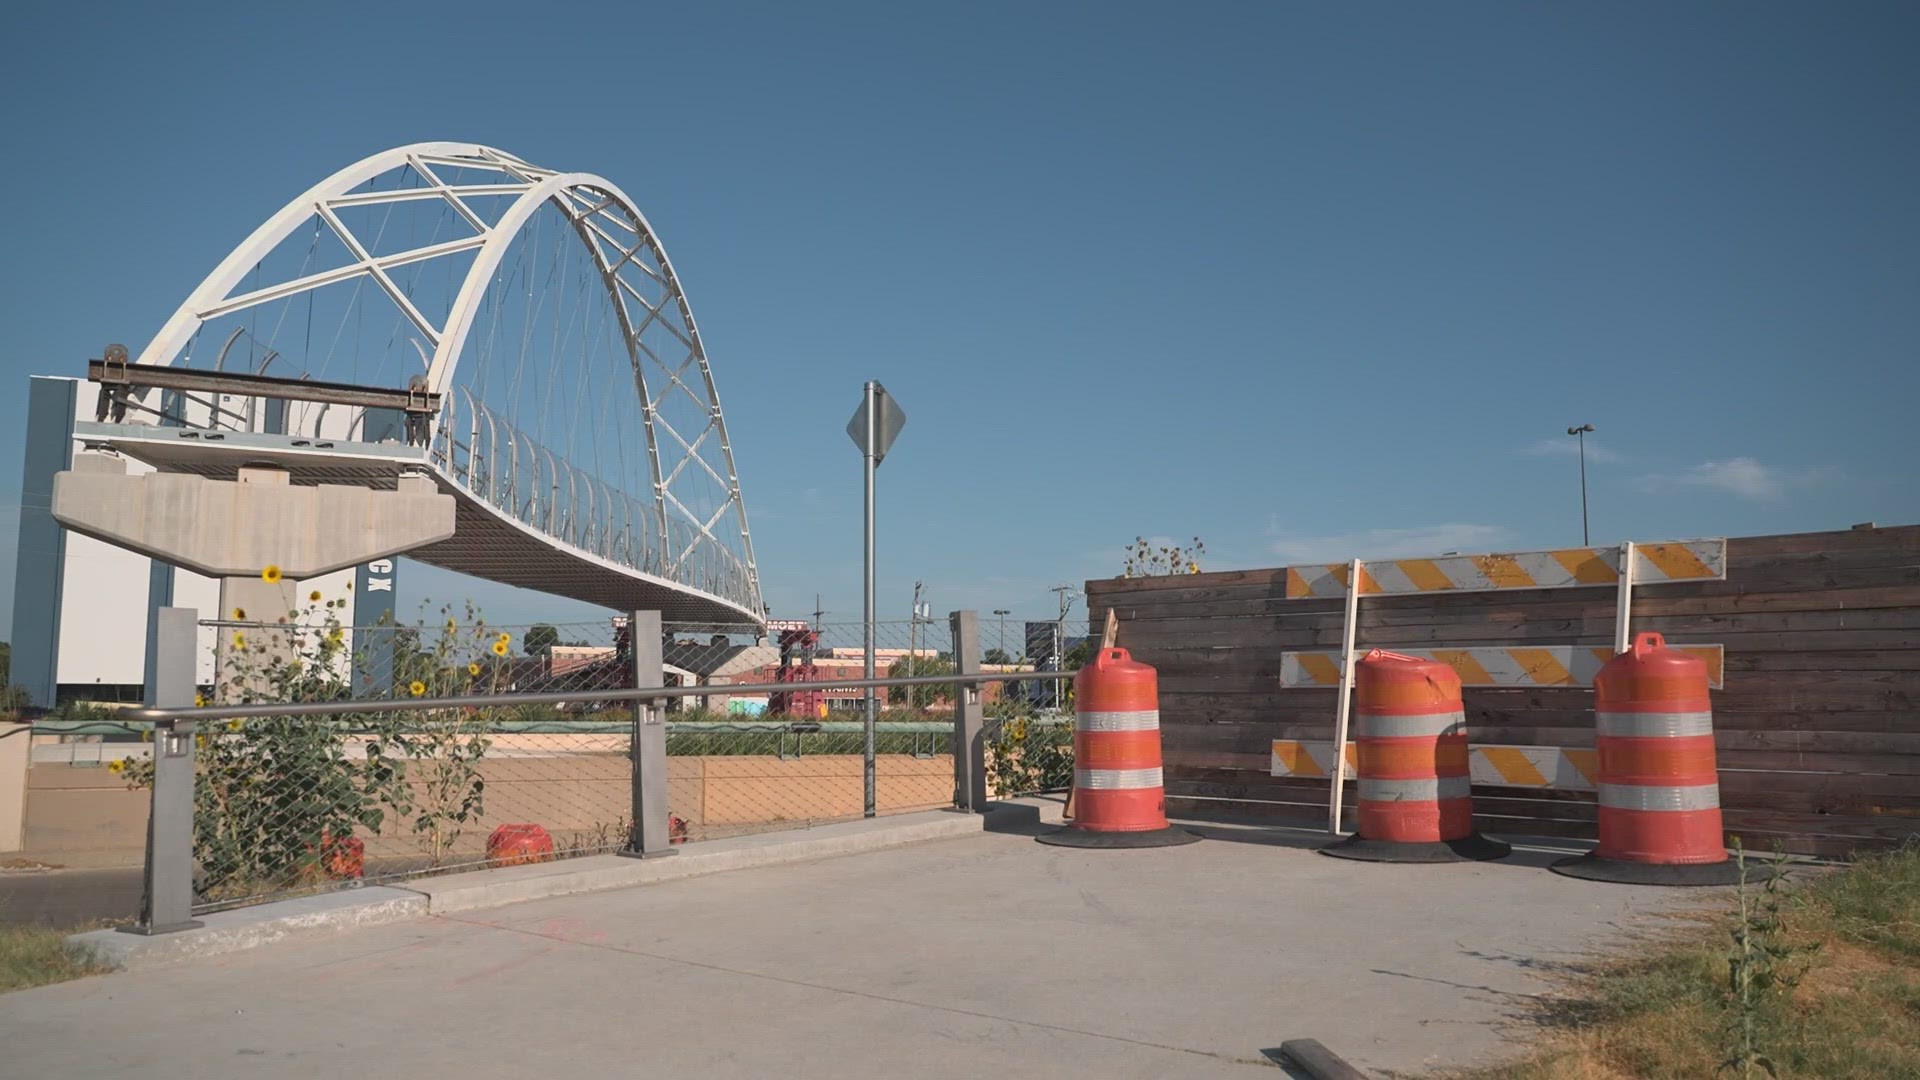 The 201-foot, 800,000-pound arch will connect Dallas’ already existing bike and pedestrian trails, TXDOT said.